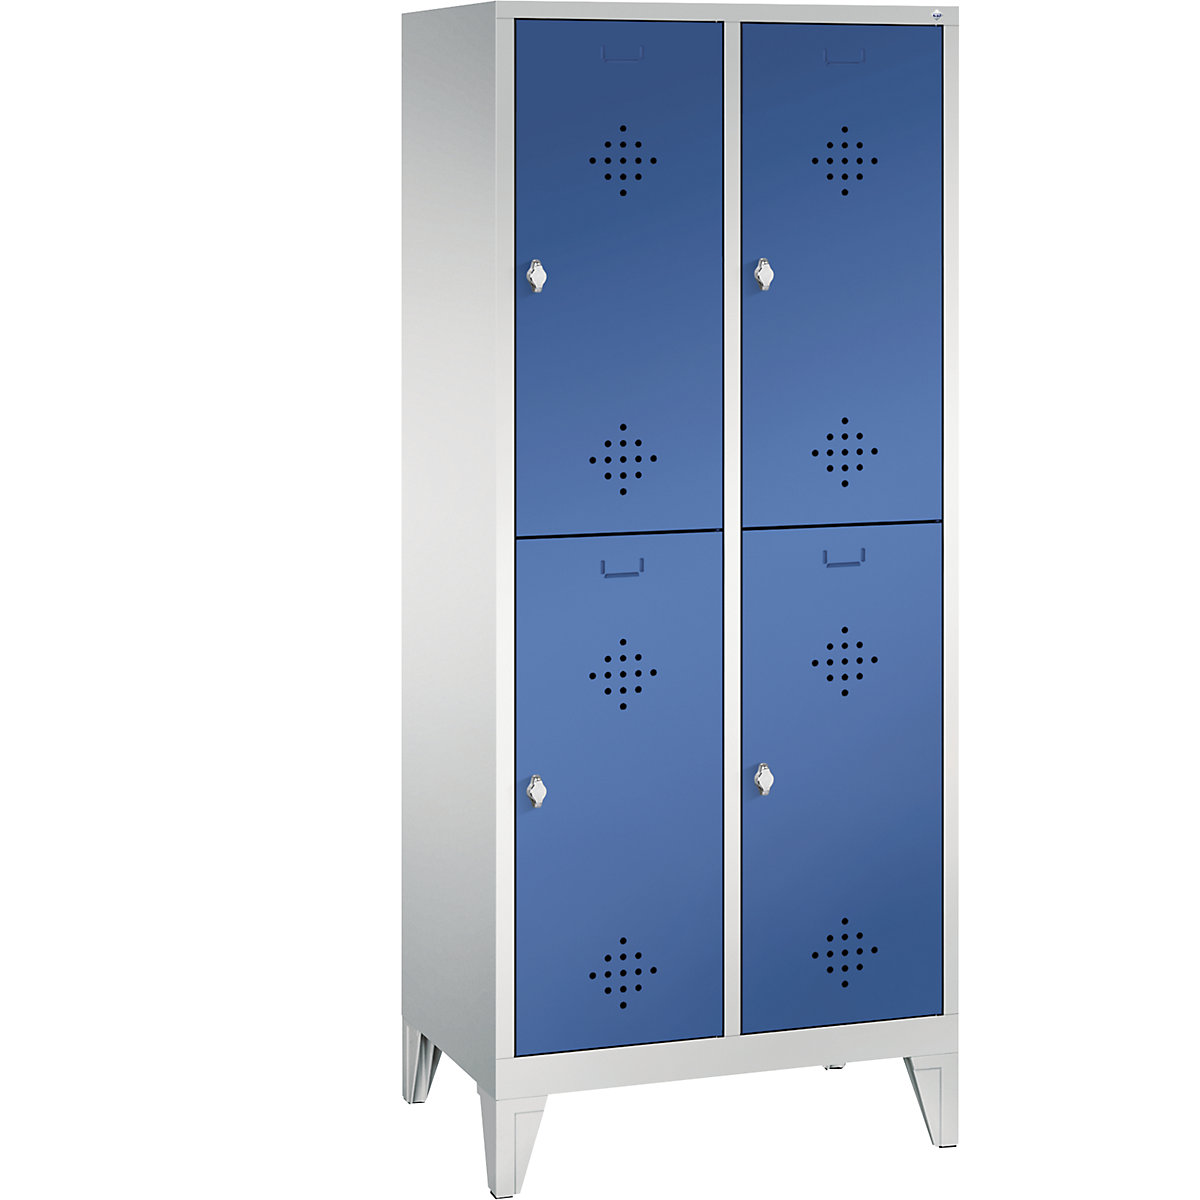 CLASSIC cloakroom locker with feet, double tier – C+P, 2 compartments, 2 shelf compartments each, compartment width 400 mm, light grey / gentian blue-14